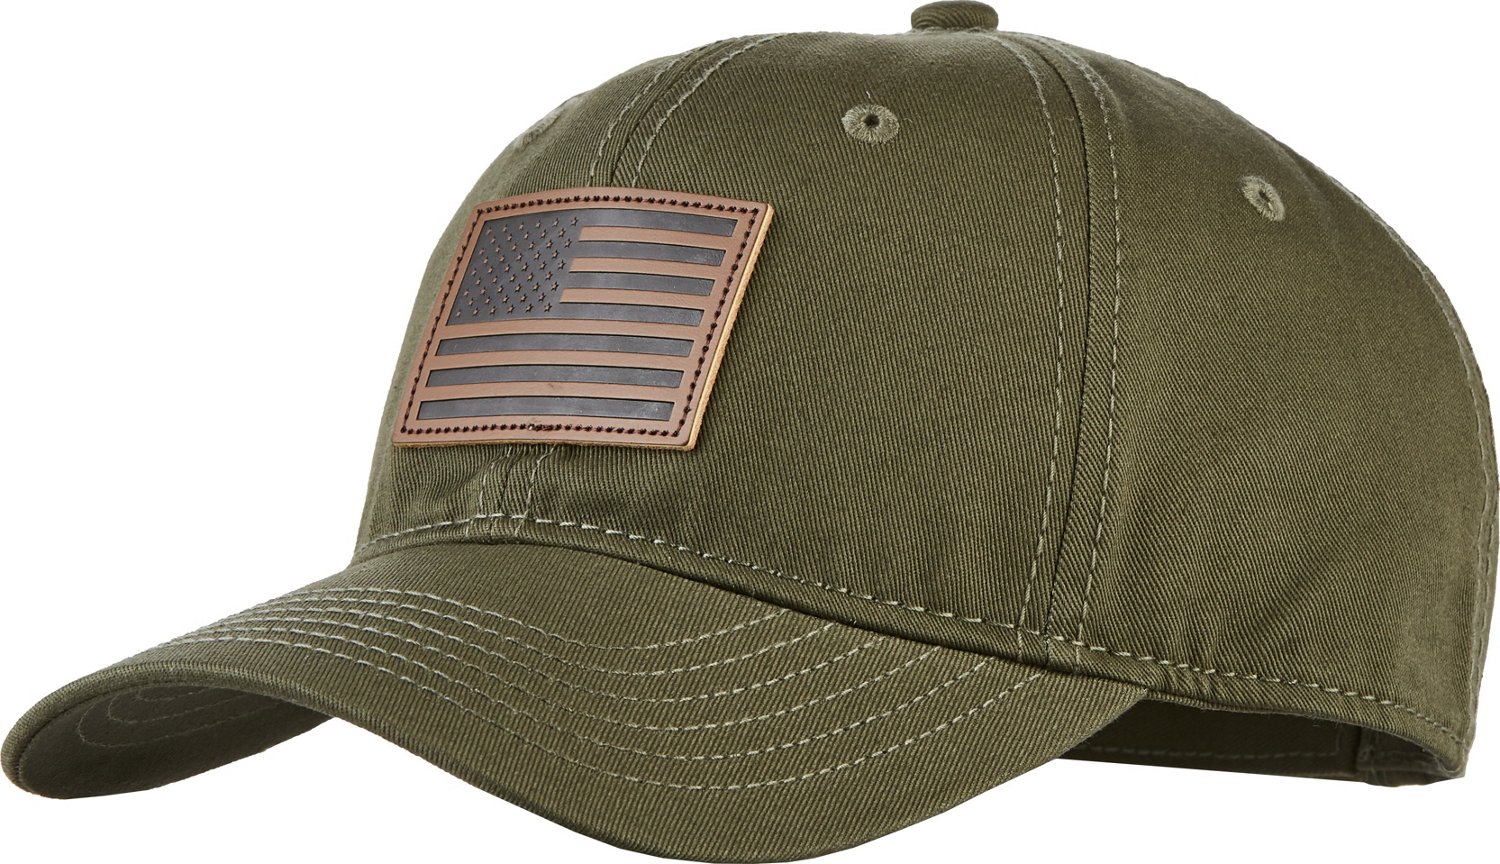 Academy Sports + Outdoors Men's Faux Leather Flag Cap | Academy